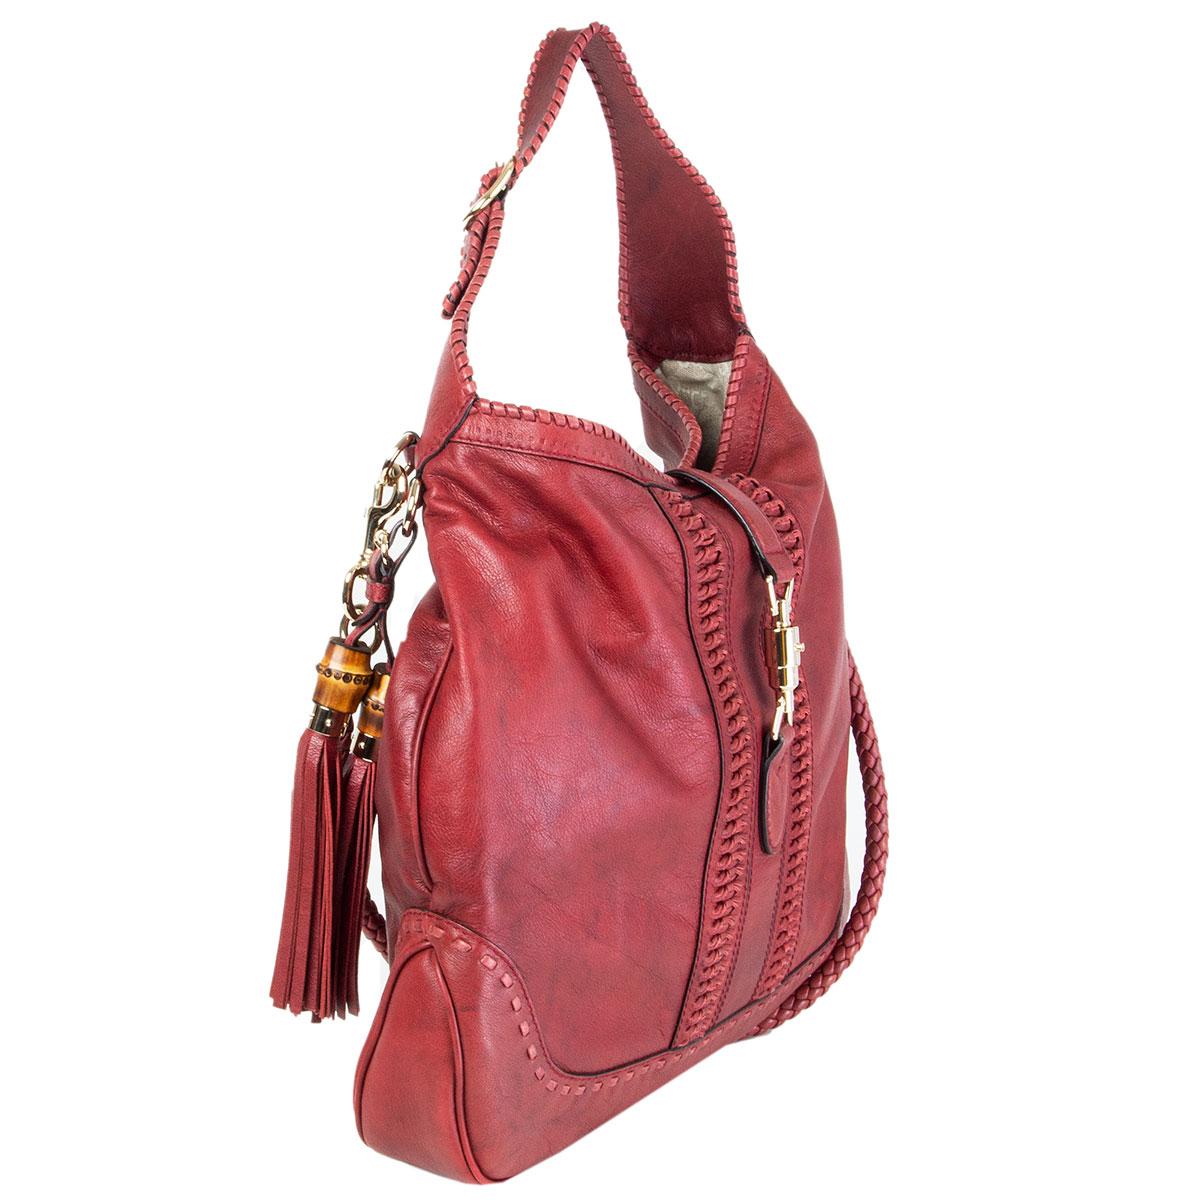 authentic Gucci x Green Carpet Challenge 'New Jackie Large' hobo in burgundy distressed calfskin featuring light gold-tone hardware. Lined in off-white canvas with one zipper pocket against the back and two small open pockets against the front.